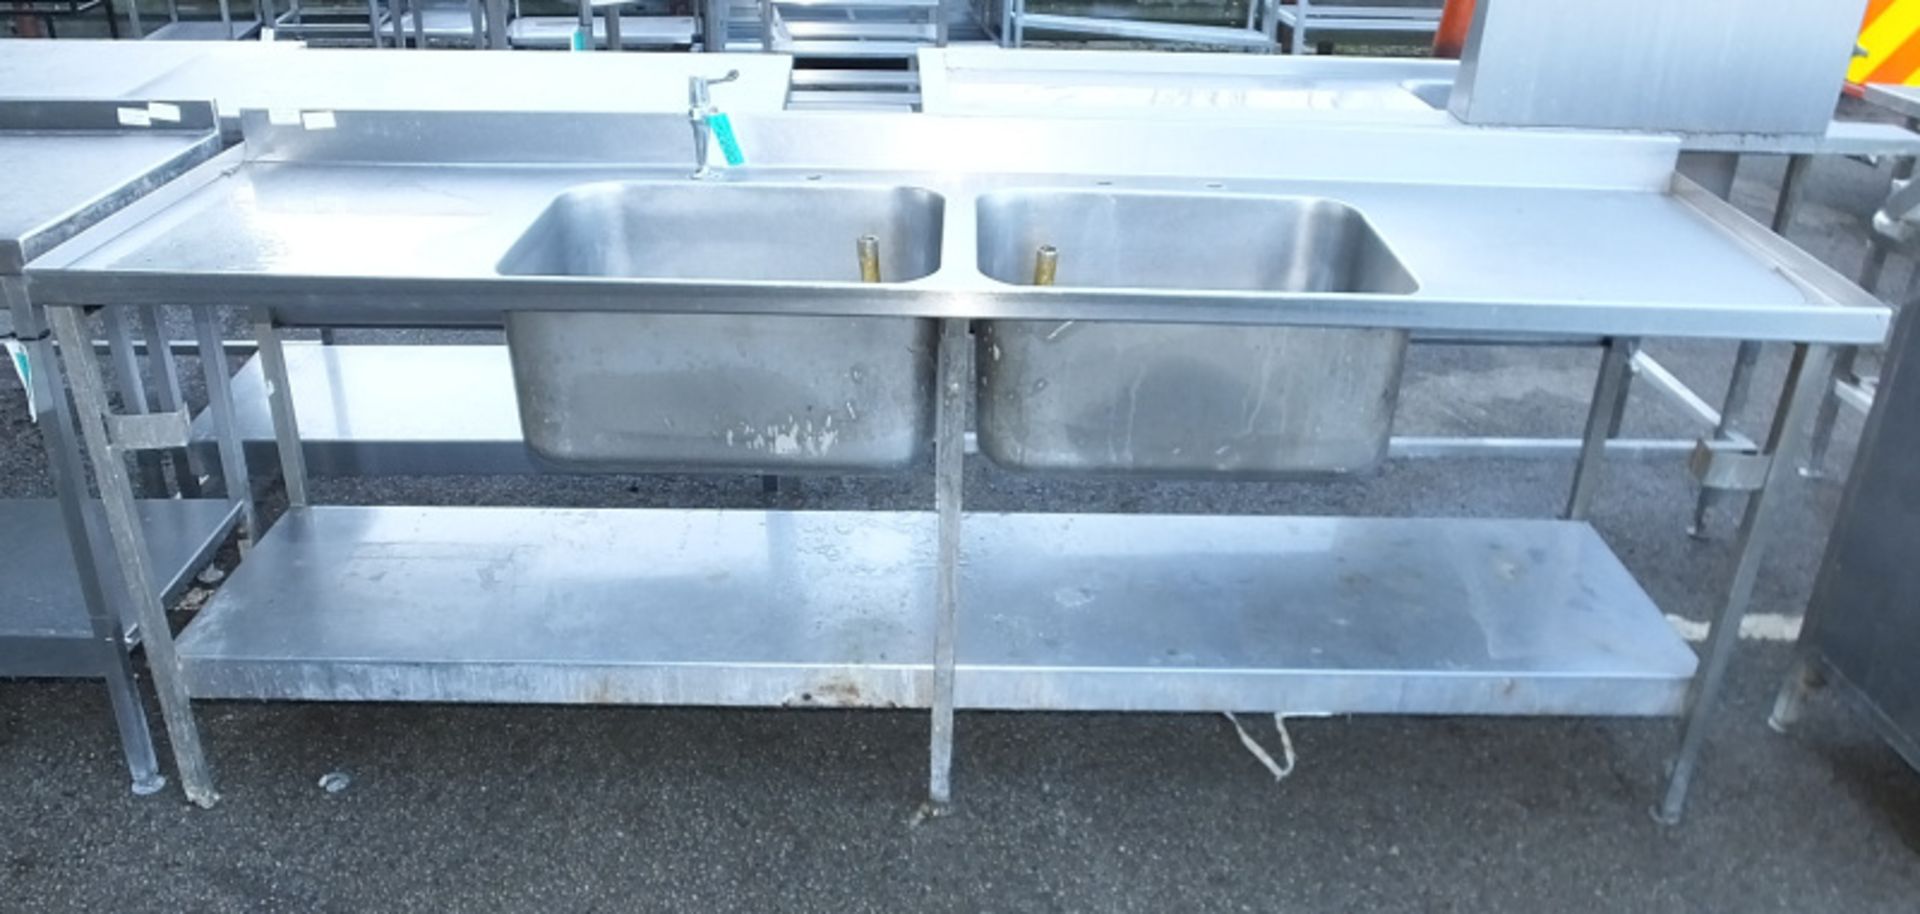 Stainless Steel Double Sink Countertop L 2400mm x W 700mm x H 900mm